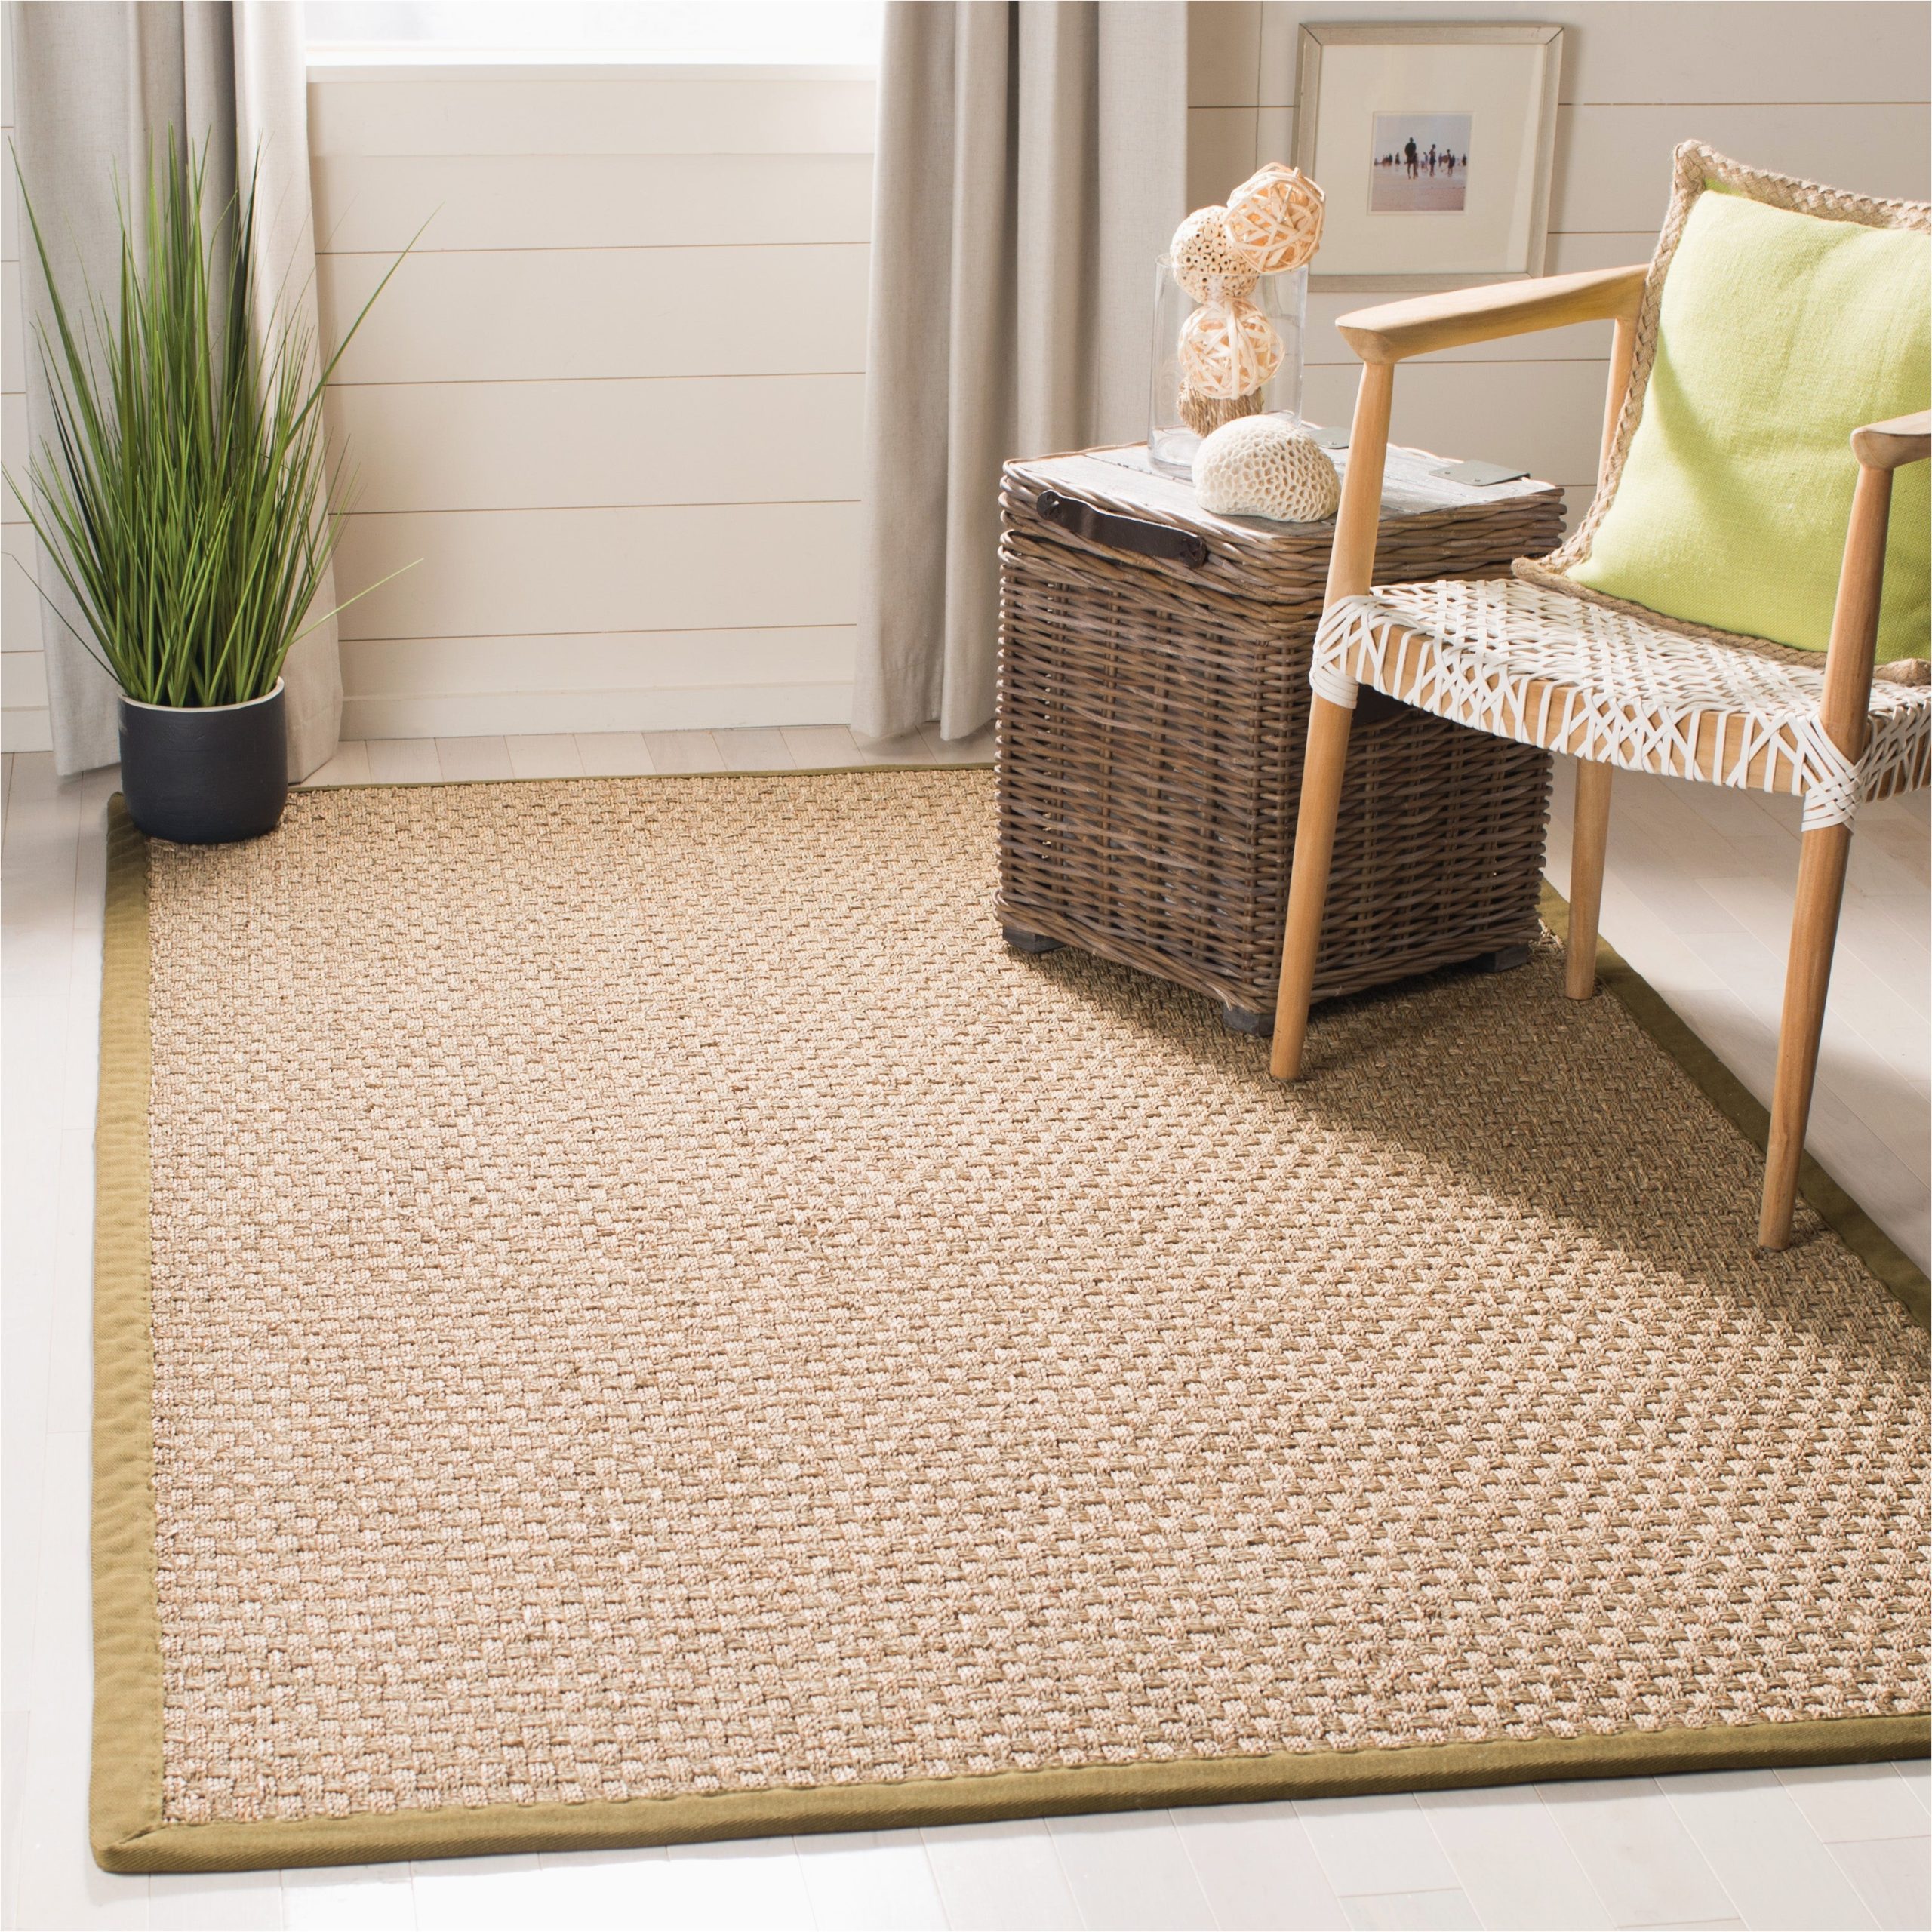 Abrielle Power Loom Natural Ivory area Rug Safavieh Casual Accent Seagrass Farmhouse Rug Overstock.com